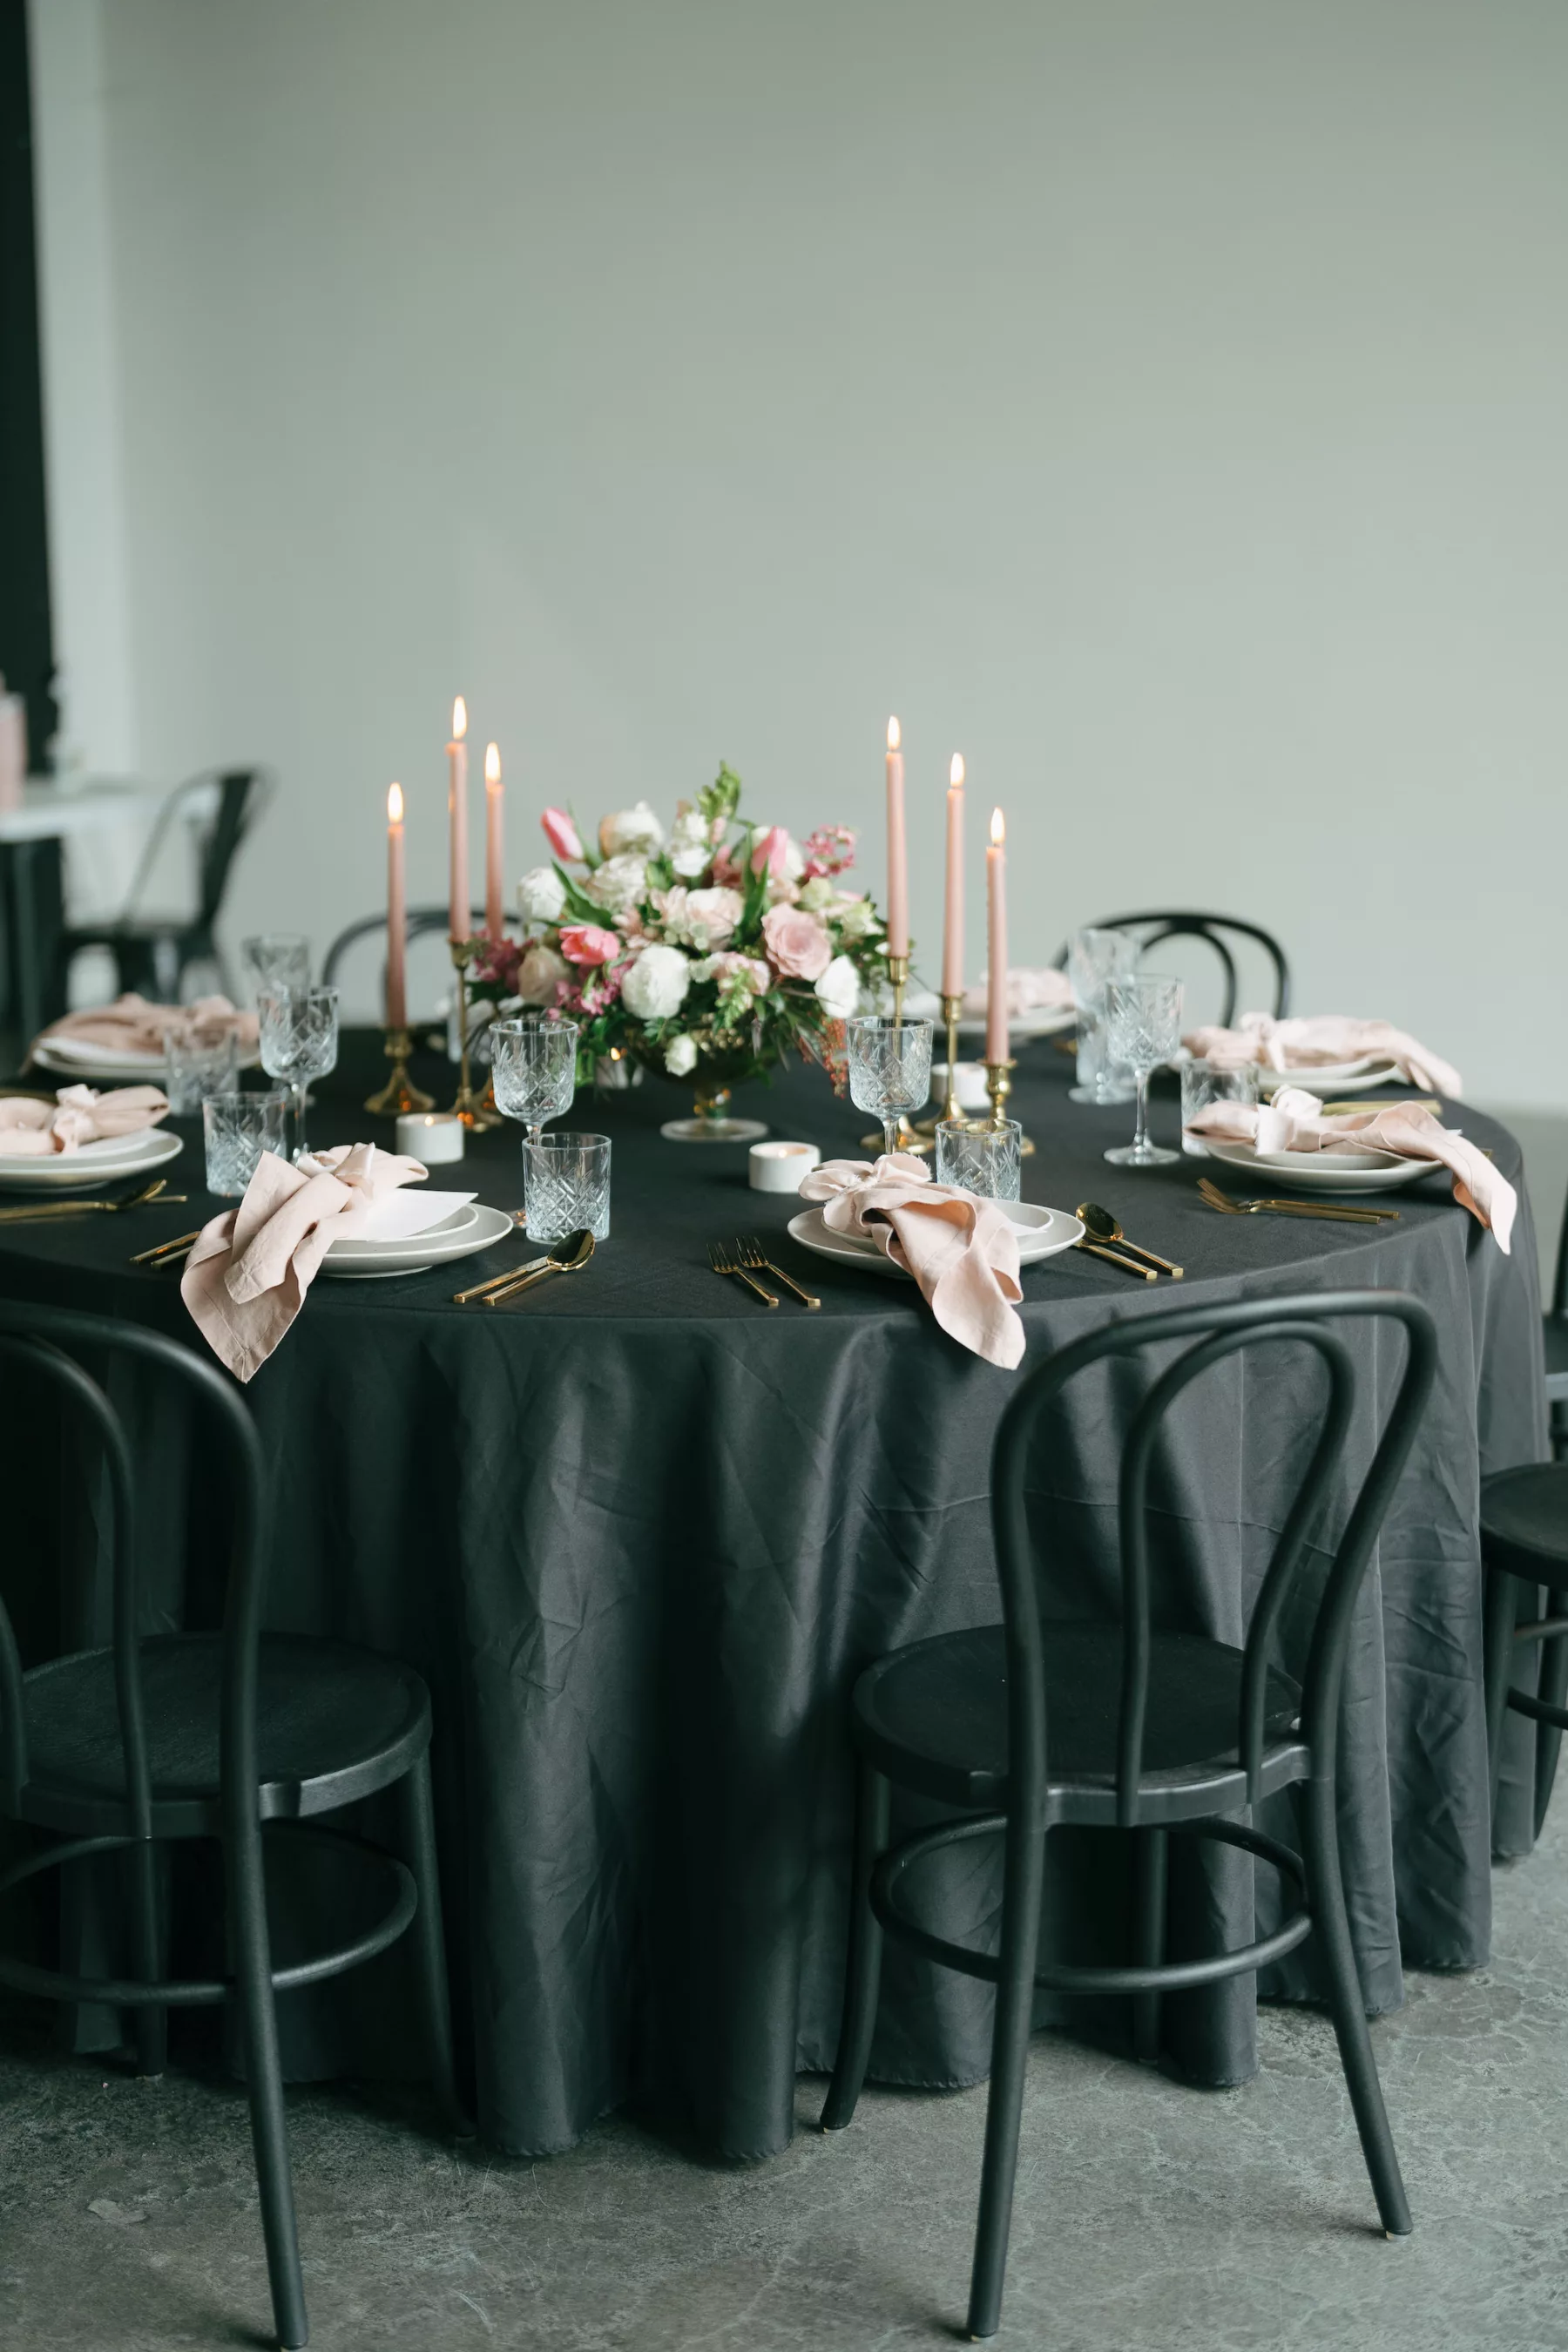 Romantic Blush Pink and Black Wedding Reception Tablescape Place Setting Decor Ideas | Tampa Bay Florist Save the Date Florida